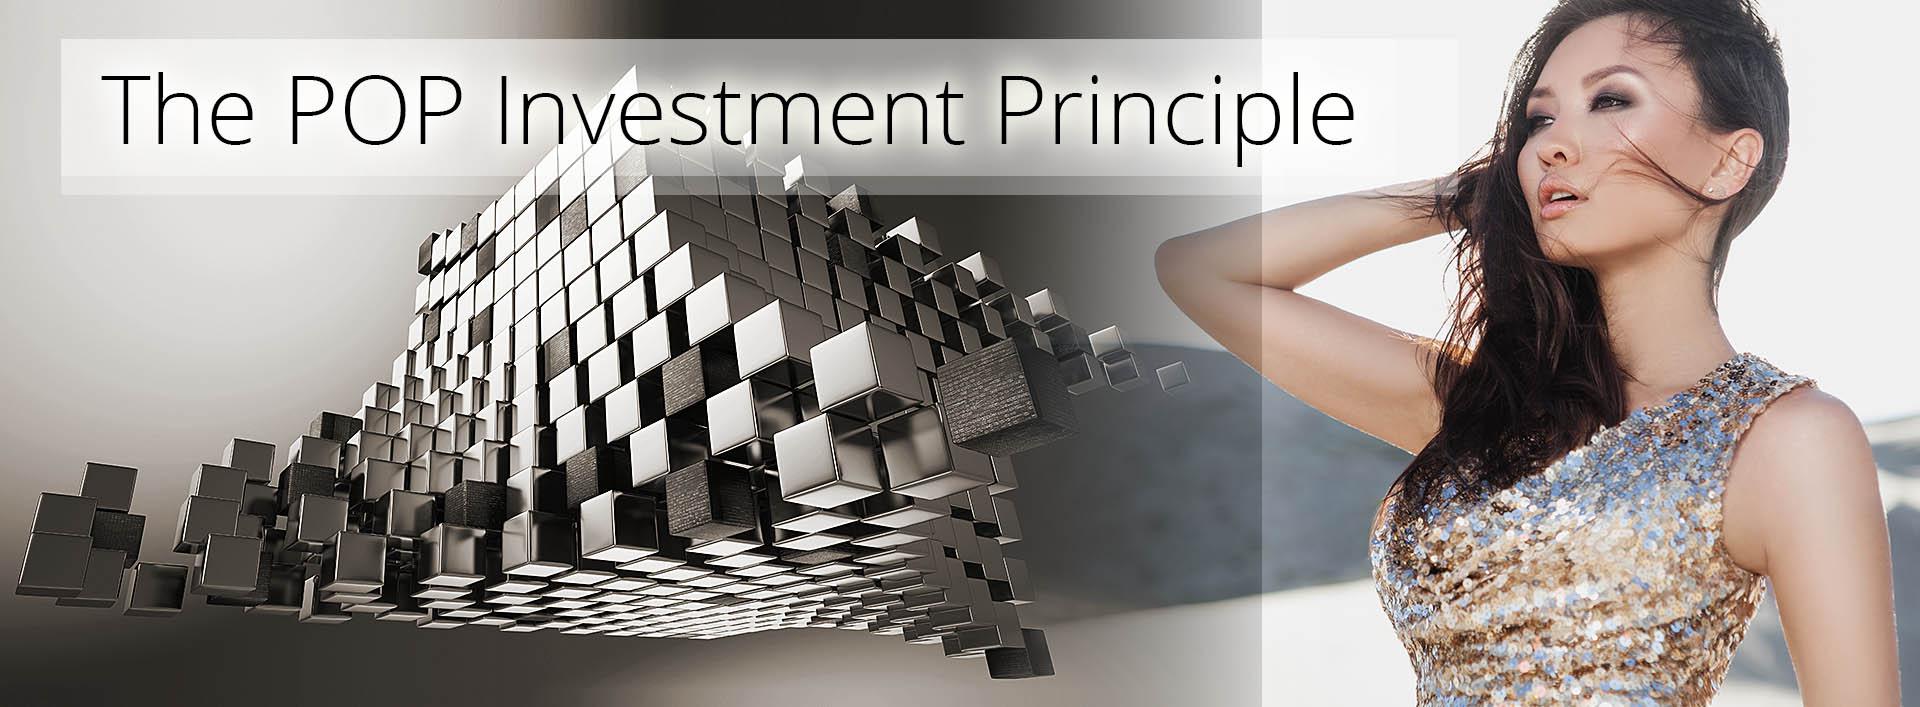 The POP Investment Principle